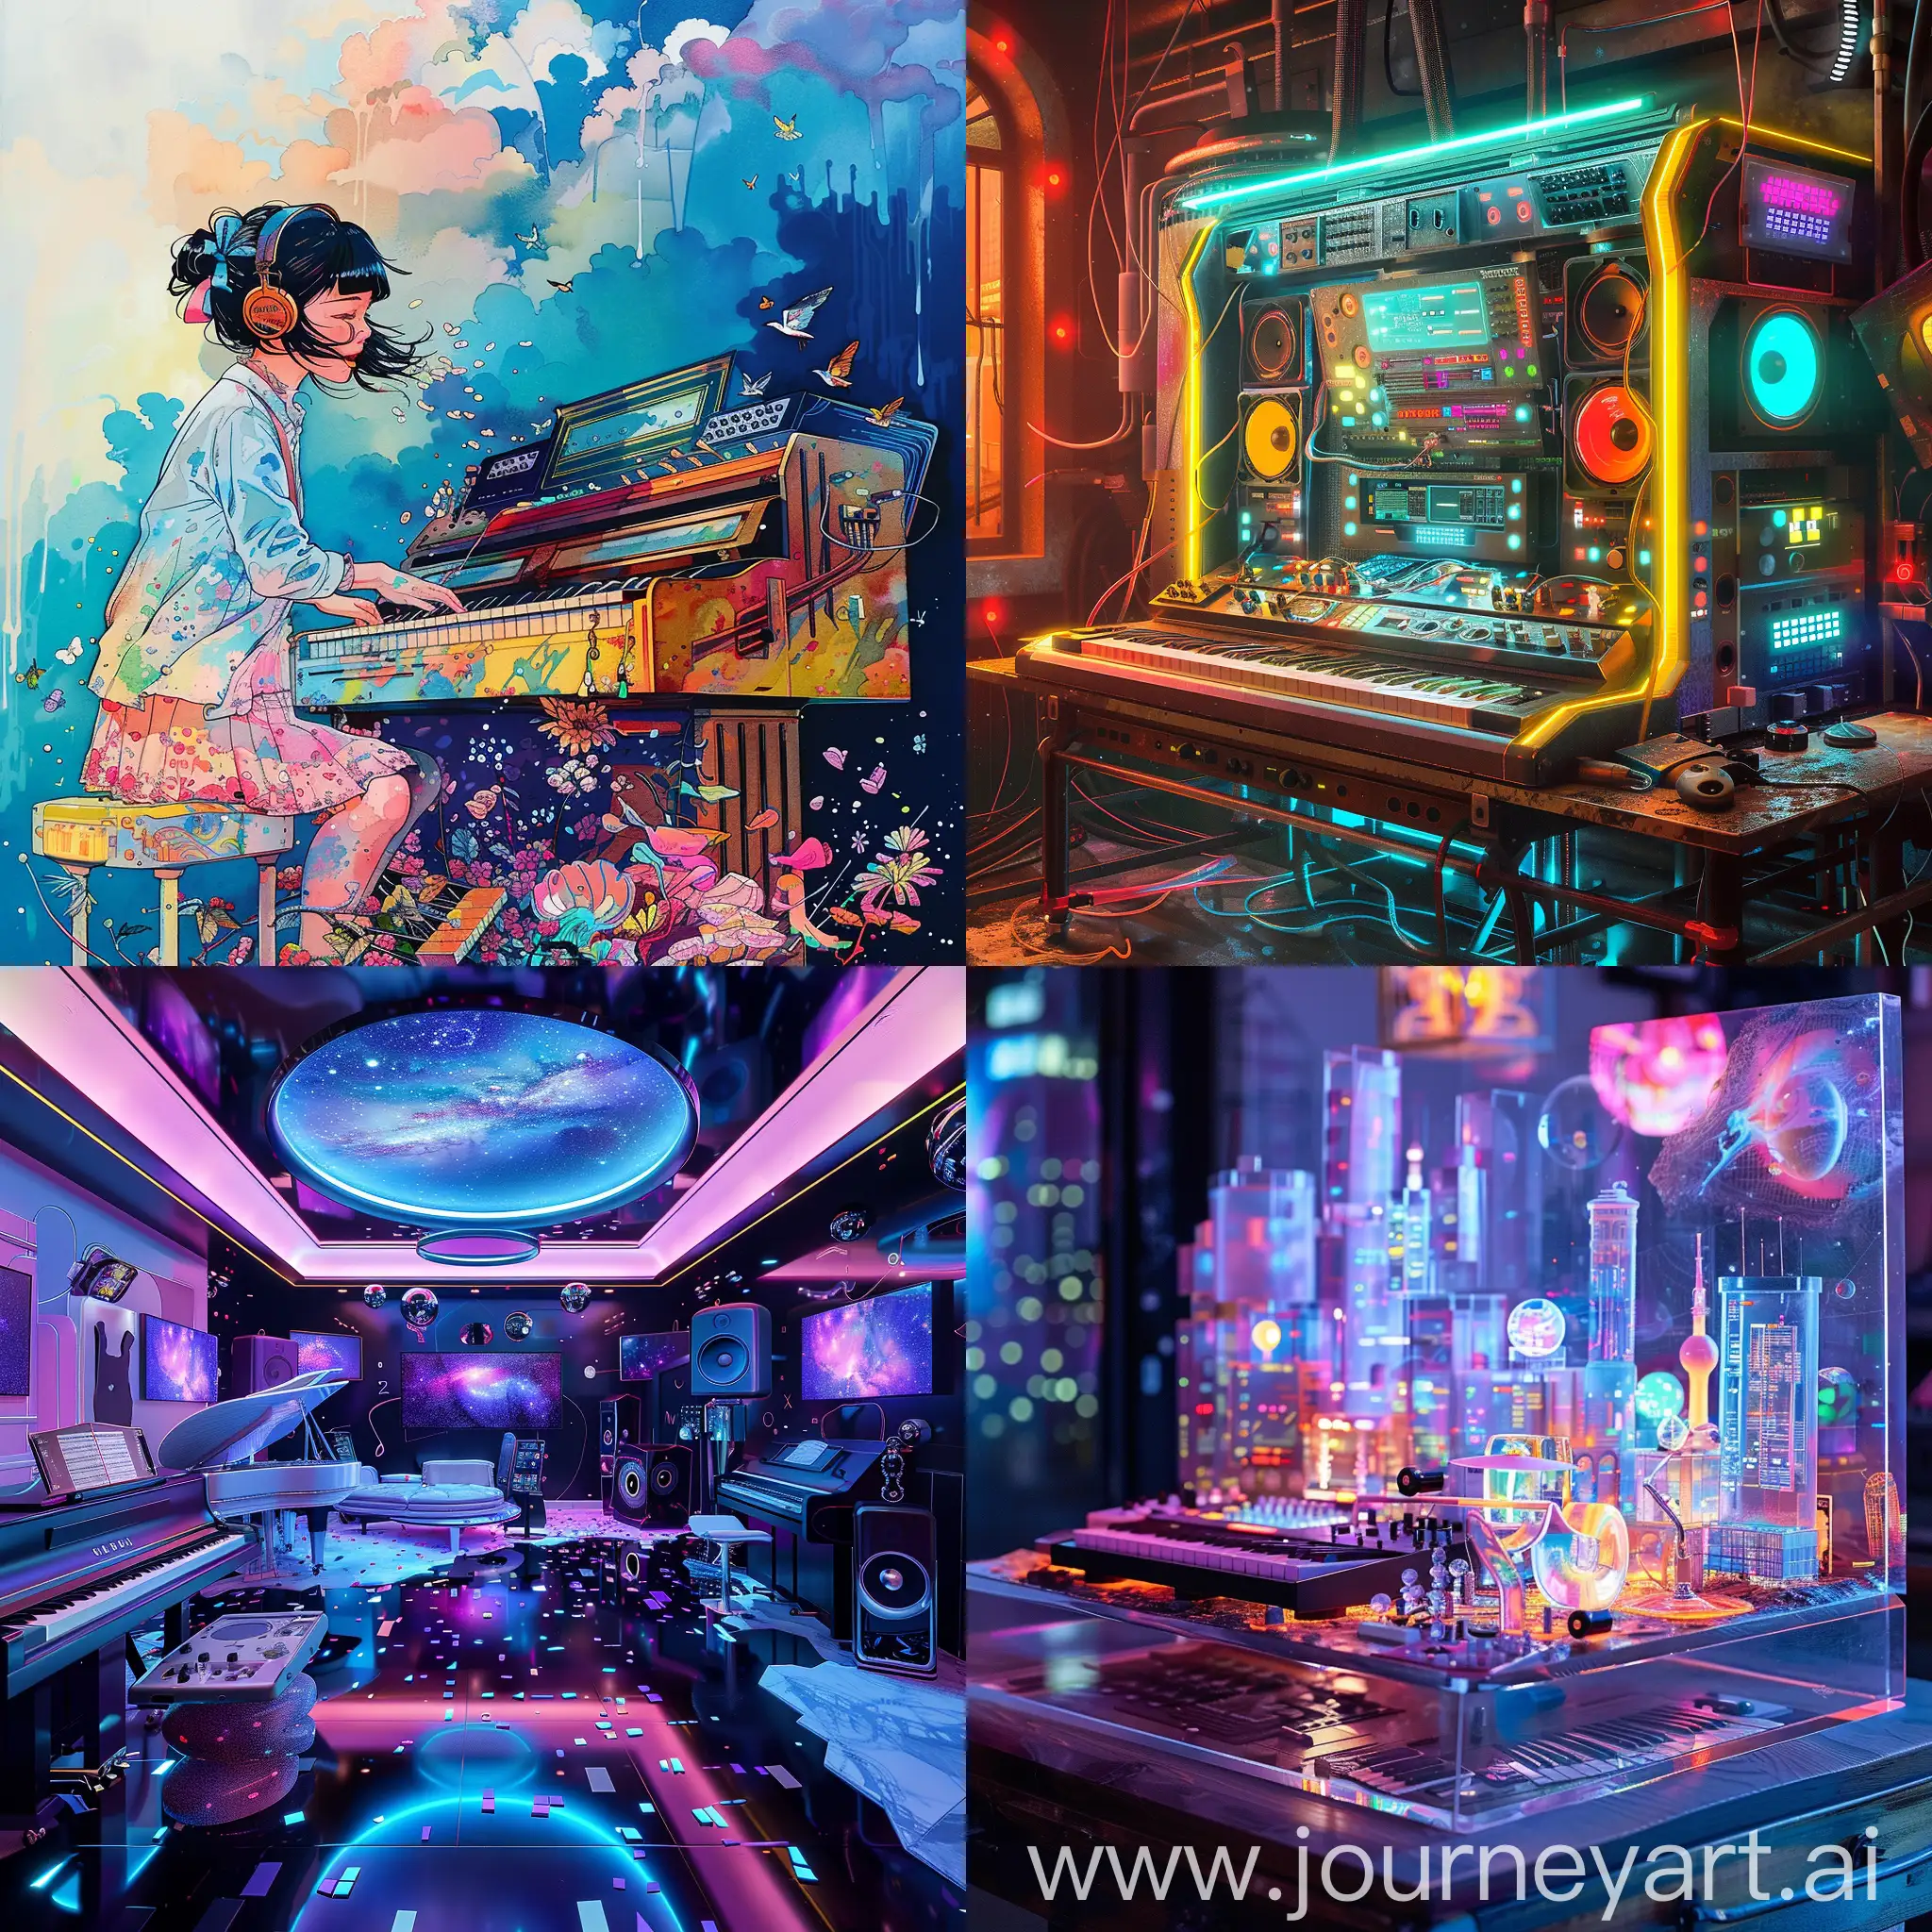 Vibrant-Music-Station-with-Electronic-Components-and-Colorful-Lights